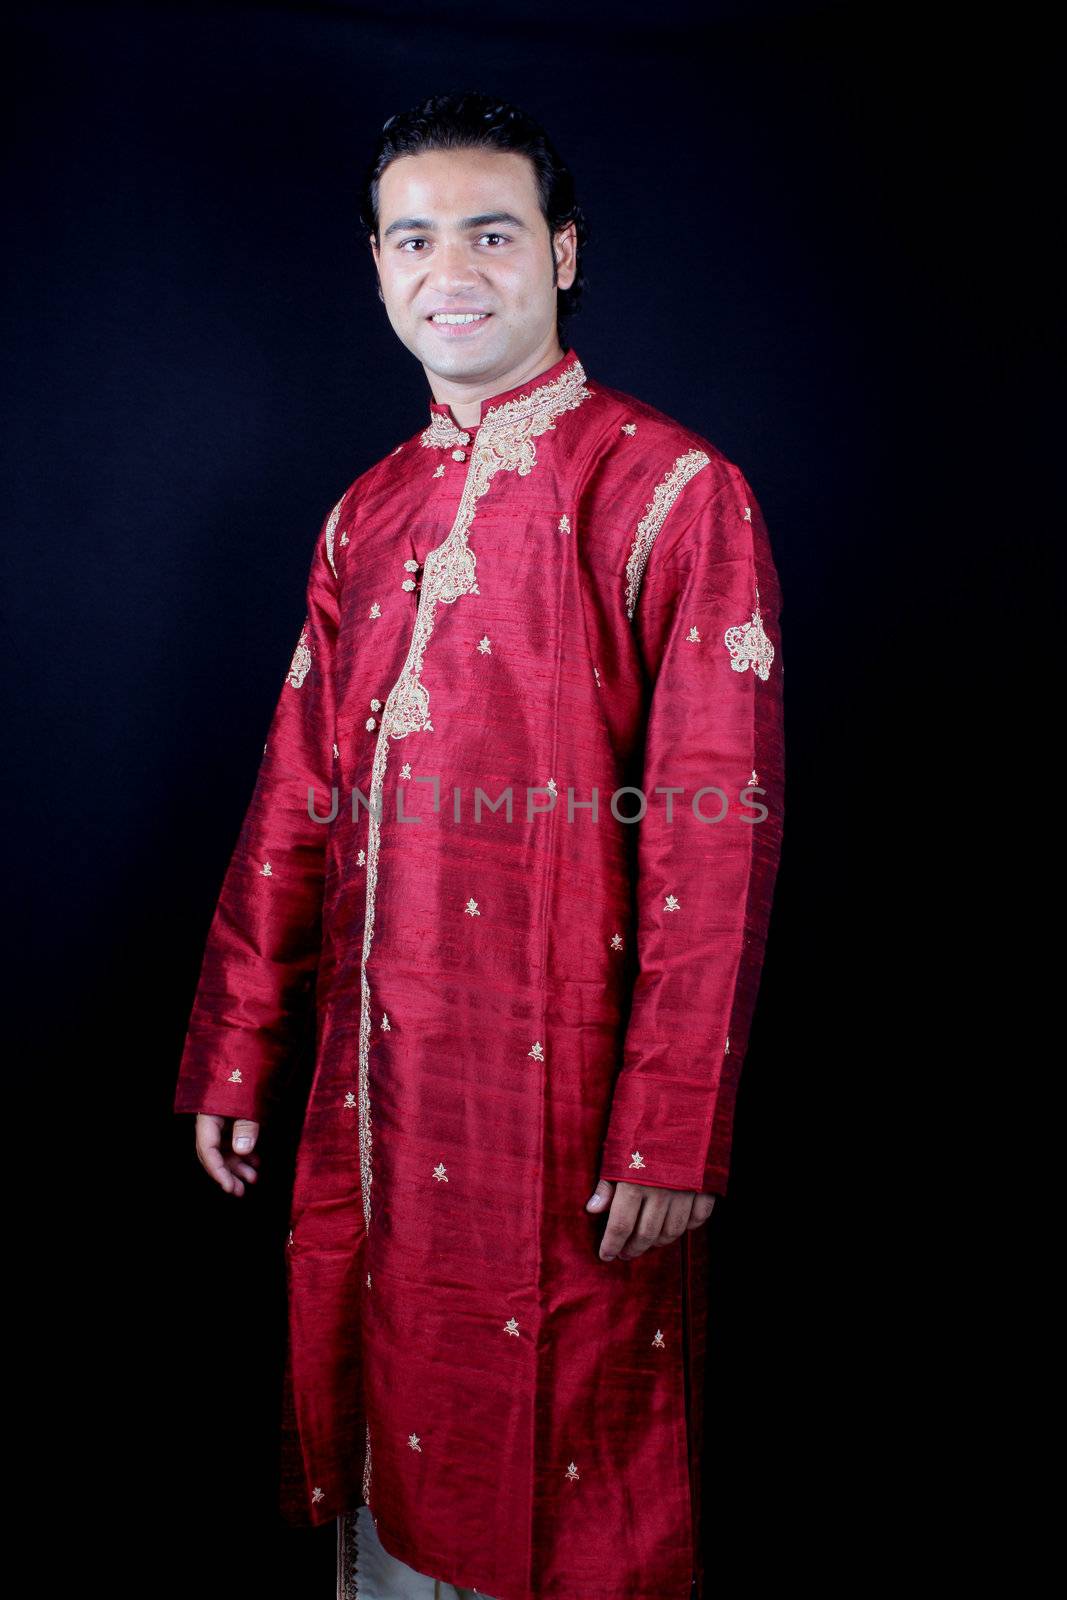 A handsome young Indian guy in a traditional attire.